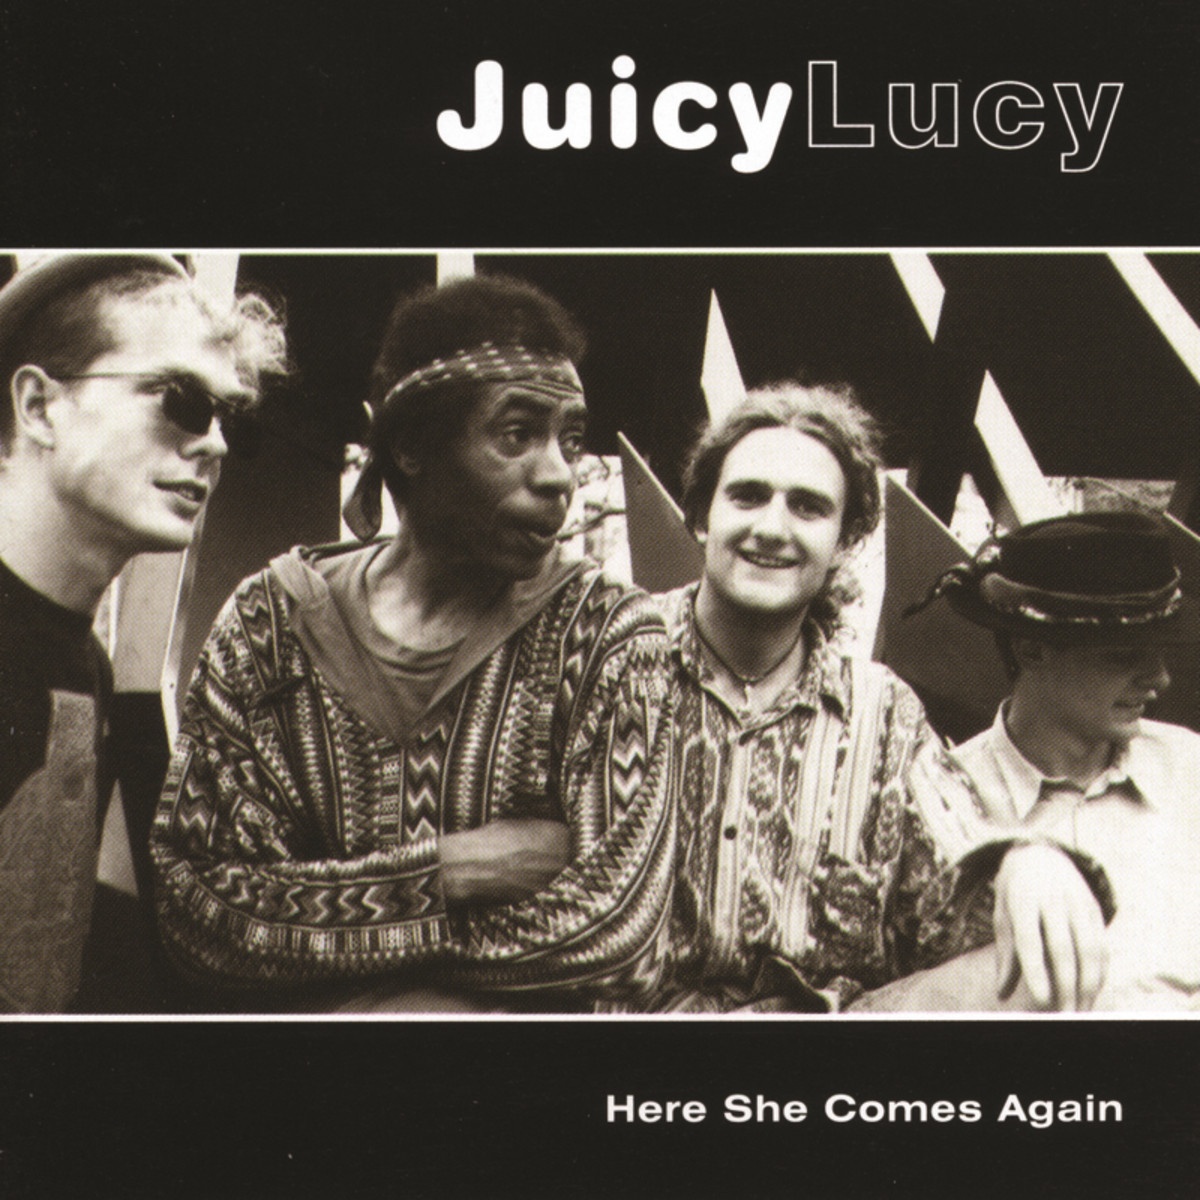 She comes the game. Группа juicy Lucy. Juicy Lucy 1995. Juicy Lucy here she comes again 1995. Группа juicy Lucy обложки.